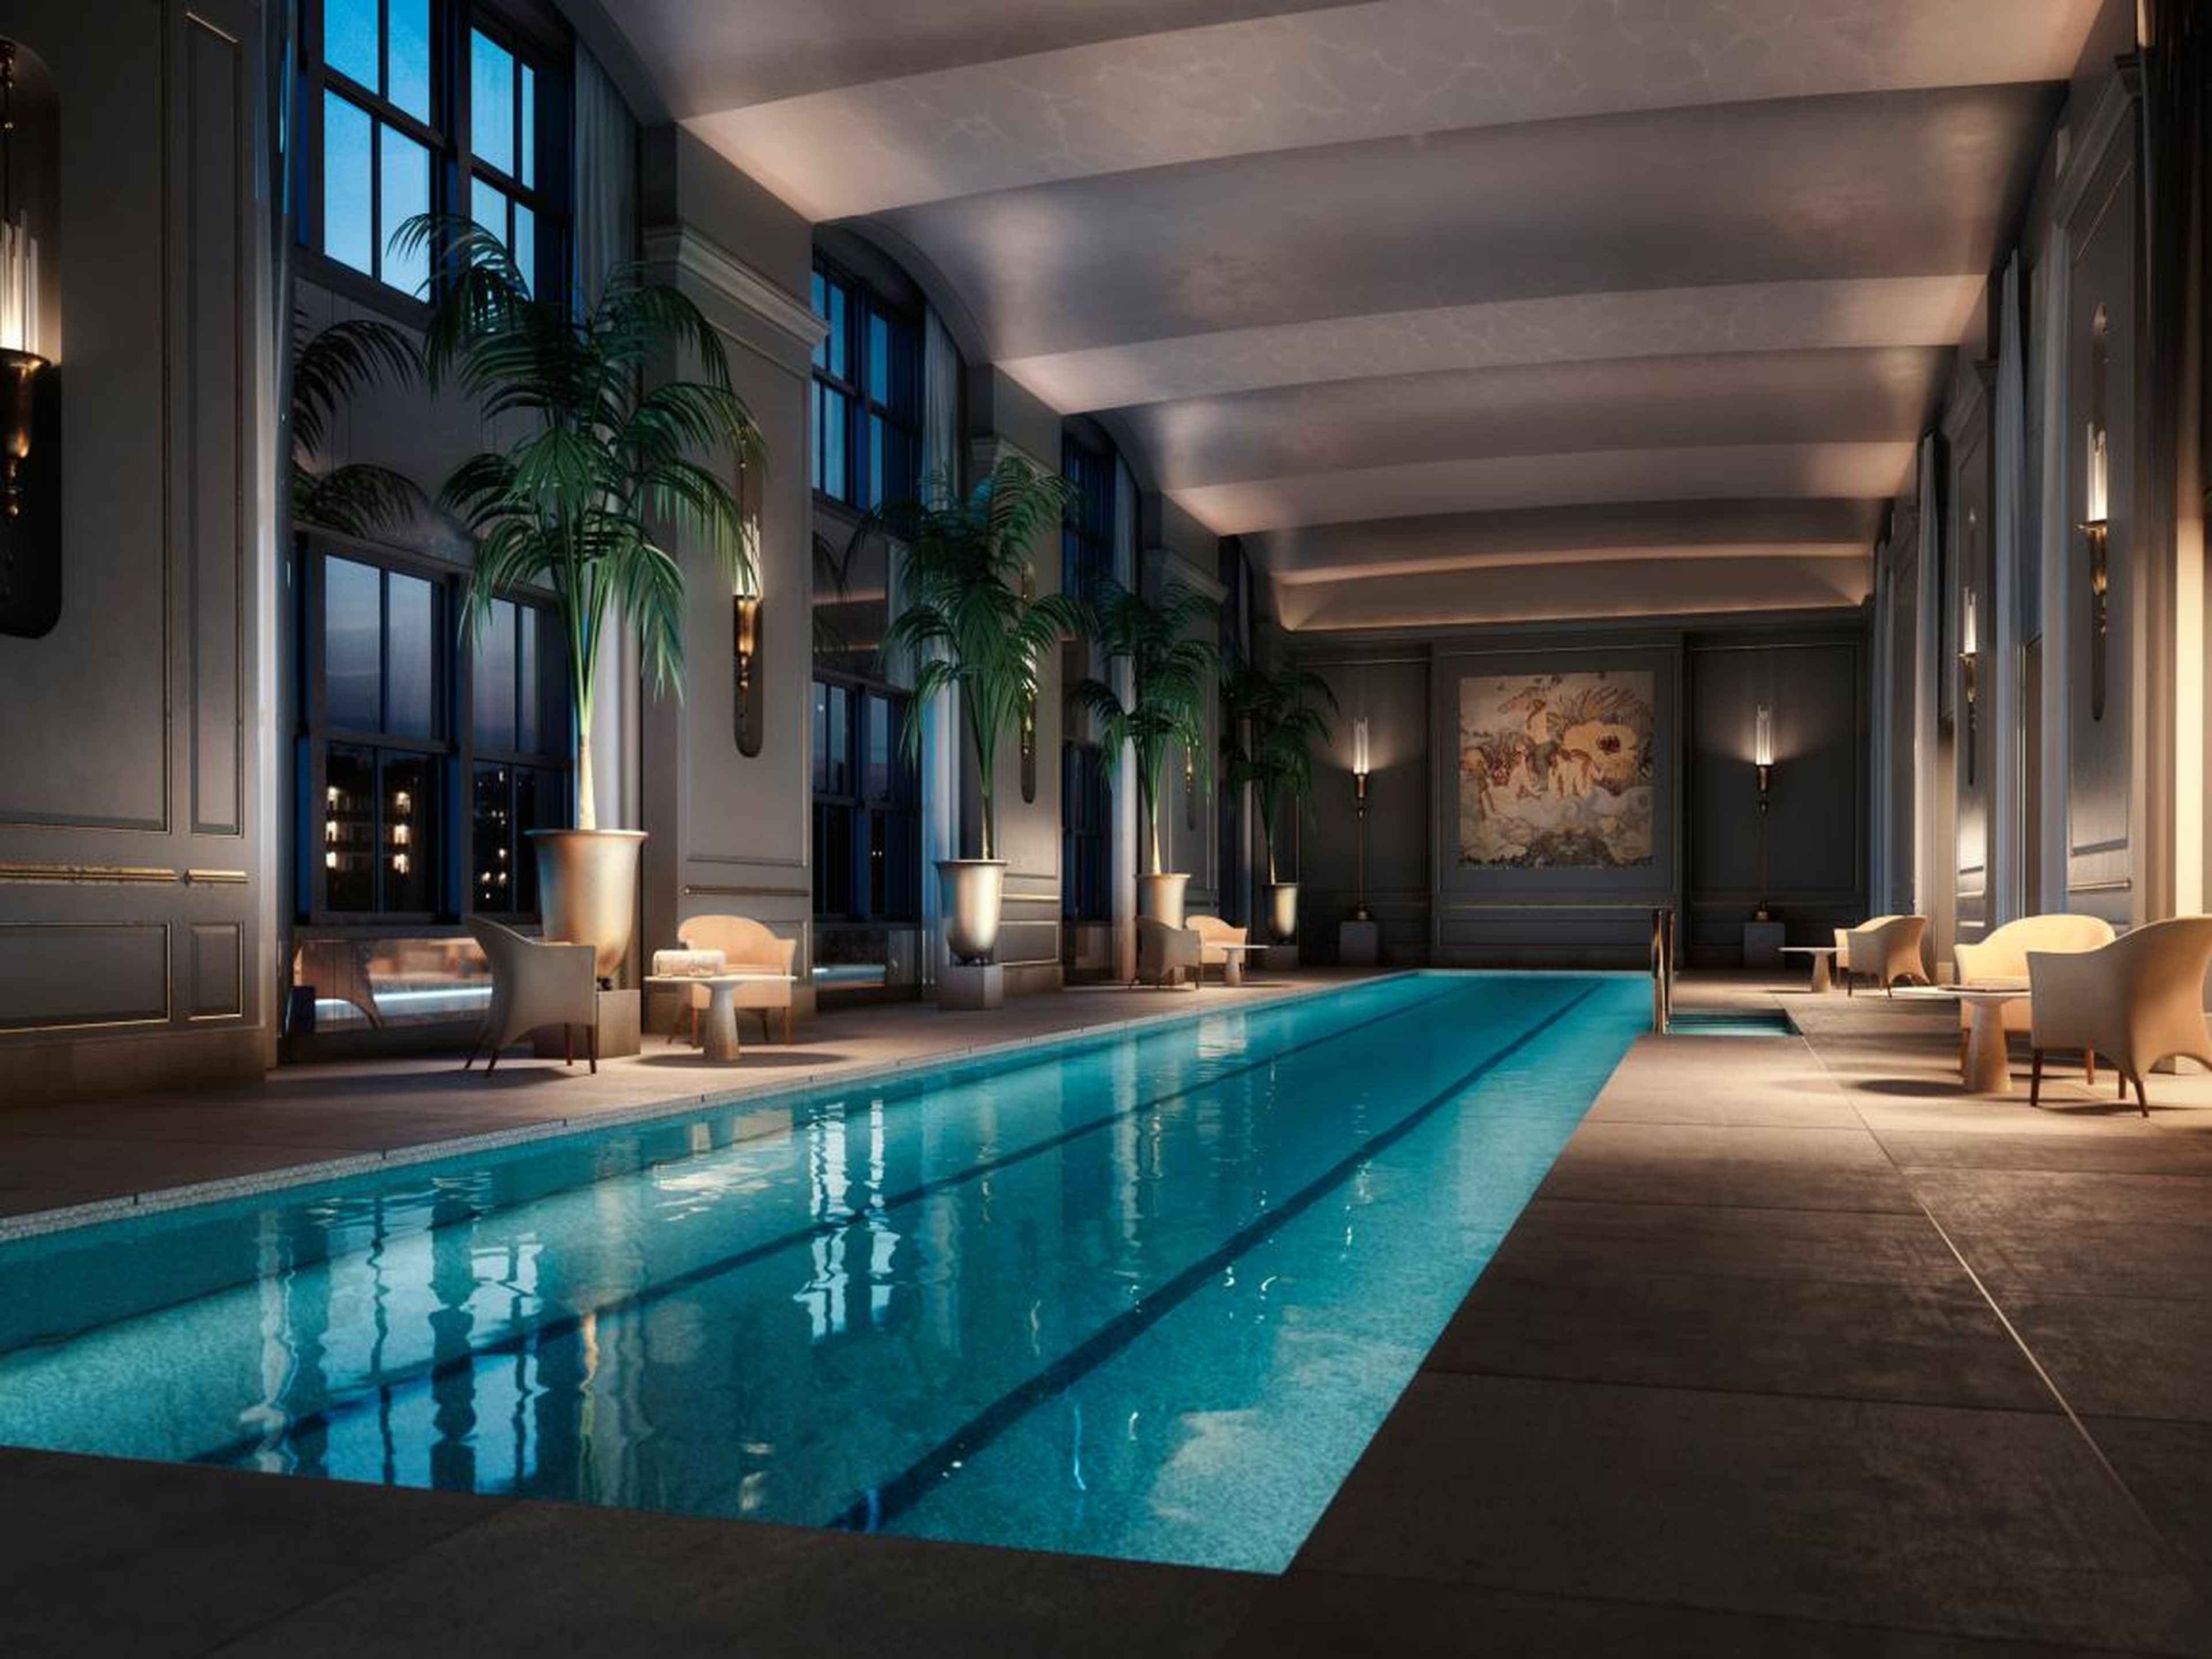 Some of the amenities include a two-lane lap pool, a spa with sauna, steam and treatment rooms, and a lounge with an outdoor terrace.